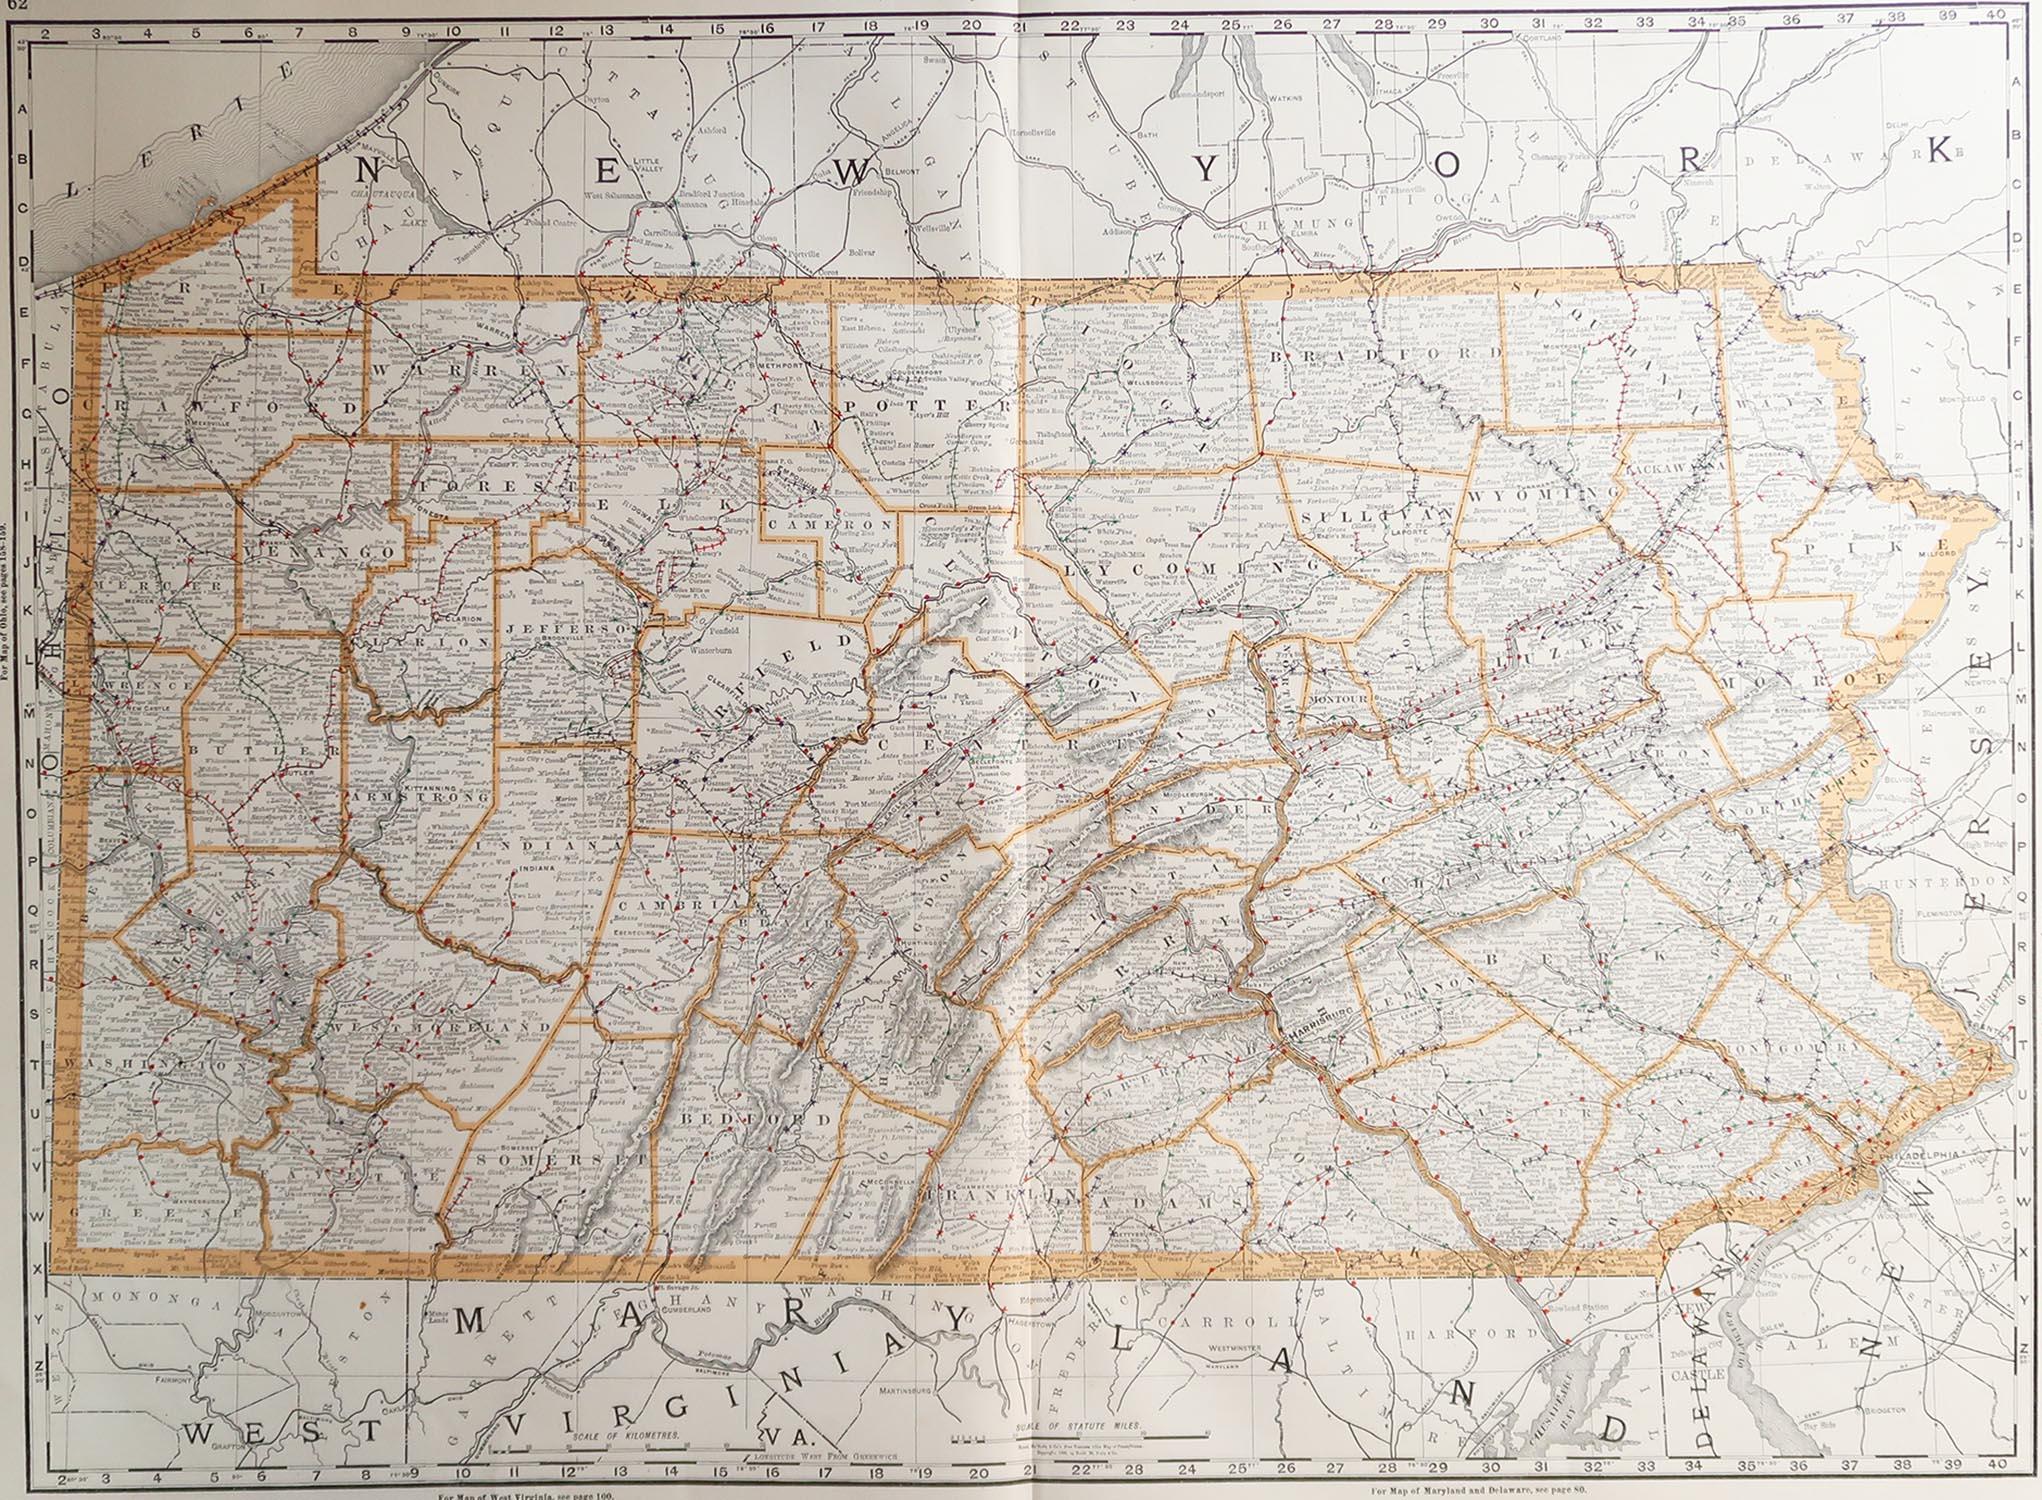 Fabulous map of Pennsylvania

Original color.

By Rand, McNally & Co.

Published, 1894.

Unframed.

Free shipping.